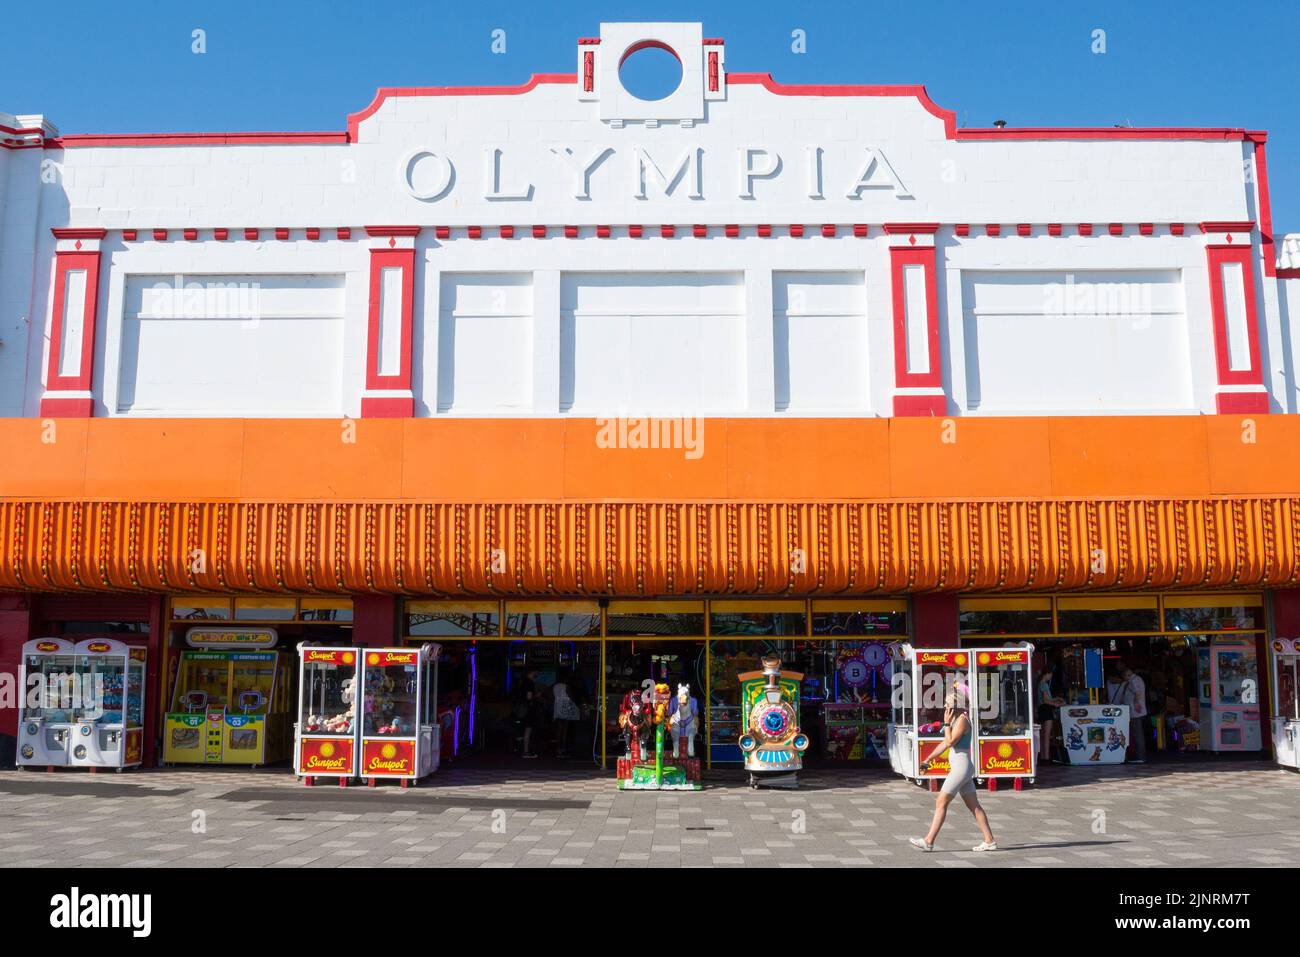 Amusement arcade with vintage art deco Olympia facade on Marine Parade, Southend on Sea, Essex, UK. Amusements business on bright, sunny day Stock Photo